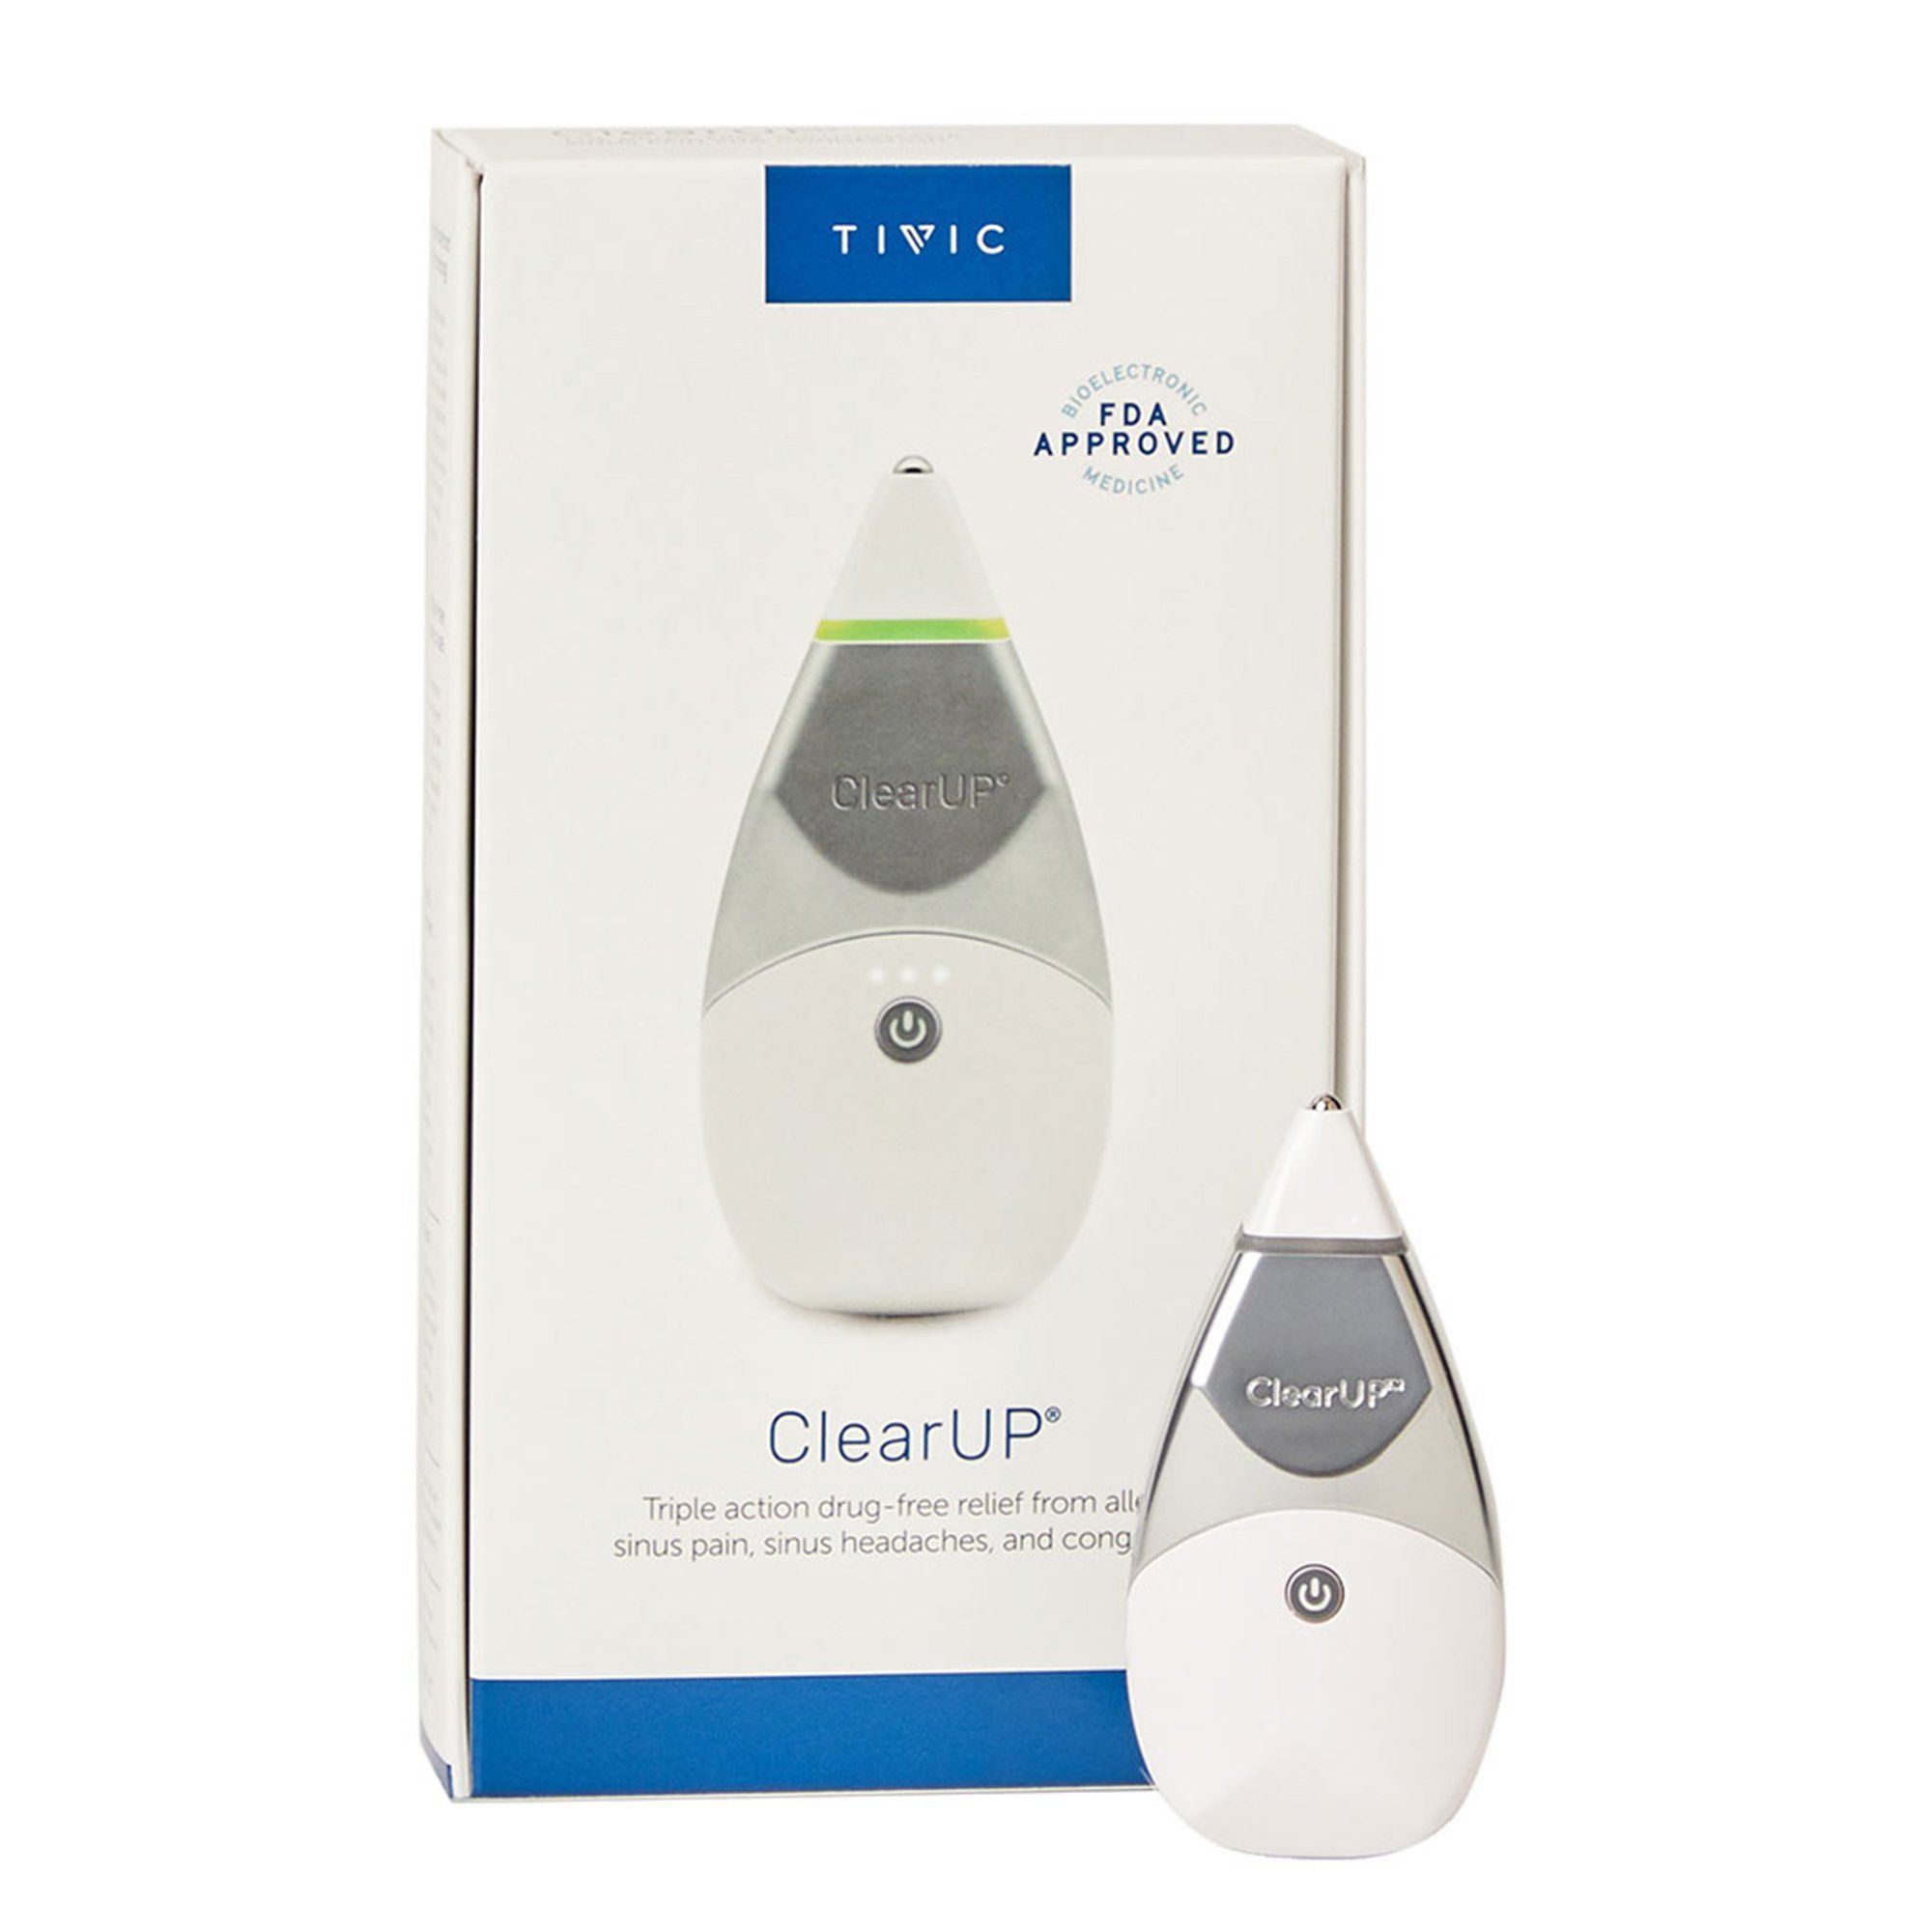 Tivic ClearUP 2.0 Bioelectronic Sinus Relief Device